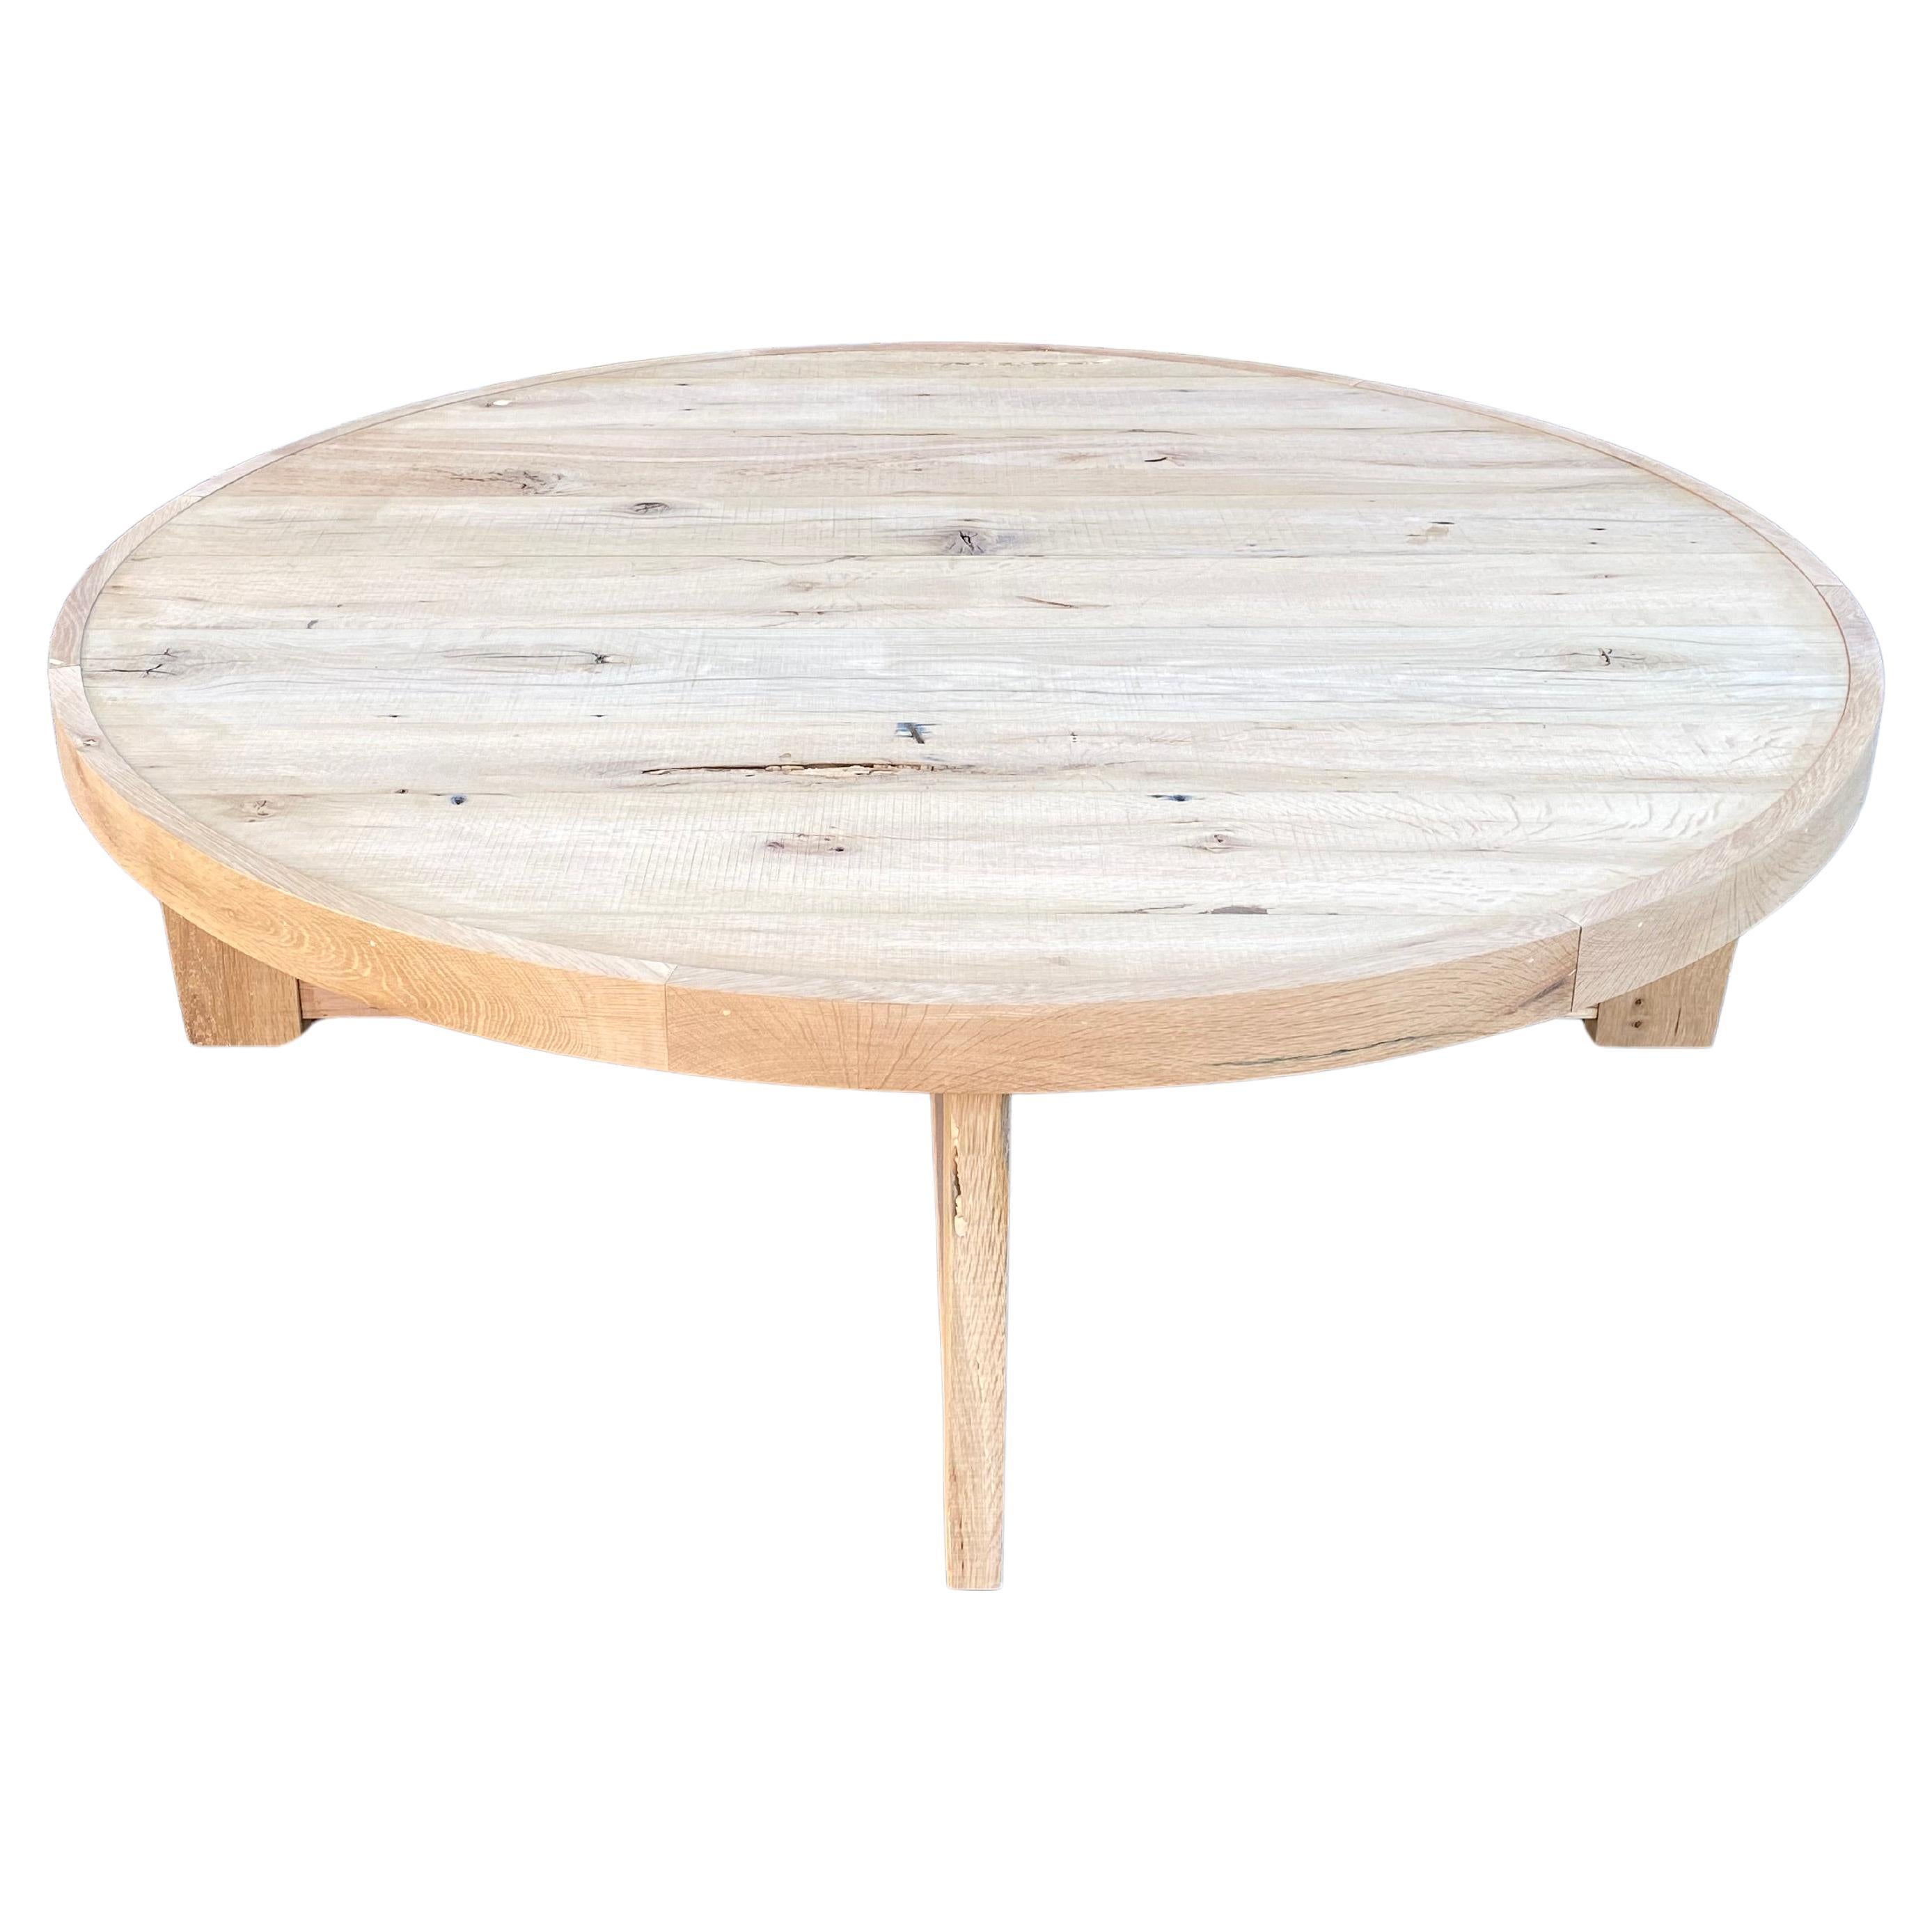  Modern Solid White Oak Handmade Coffee Table For Sale